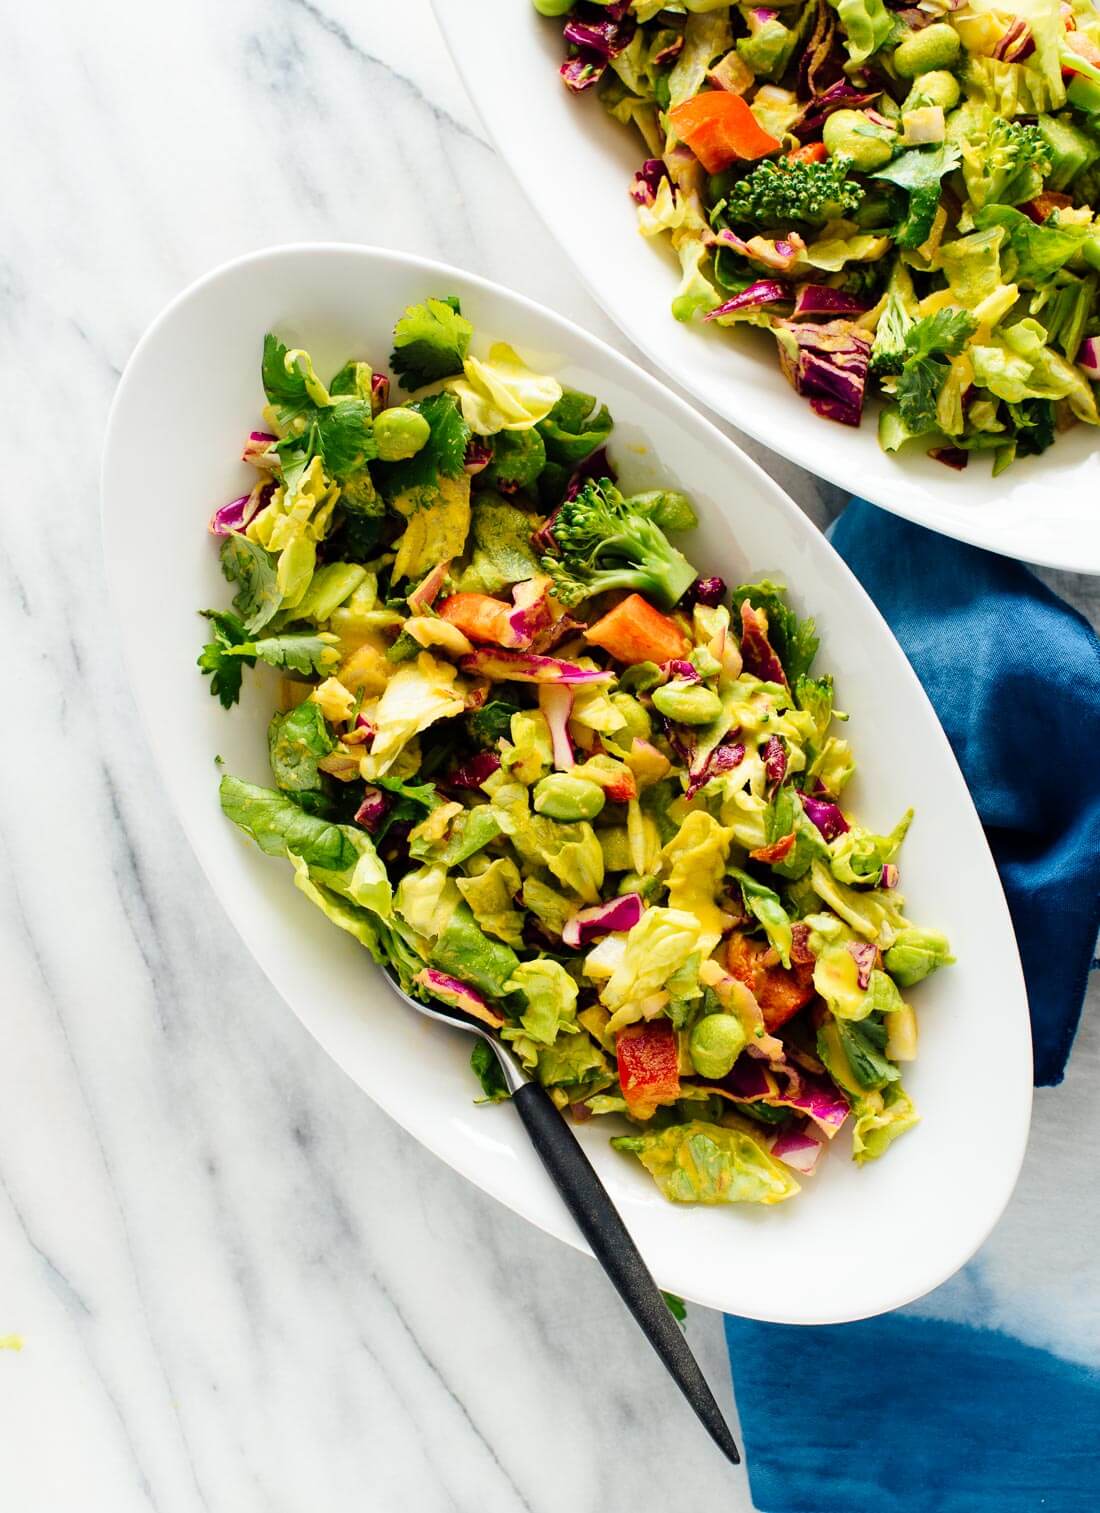 This healthy green salad tastes amazing! Featuring crisp romaine, edamame, chopped cabbage, bell pepper and broccoli in homemade carrot-ginger salad dressing.